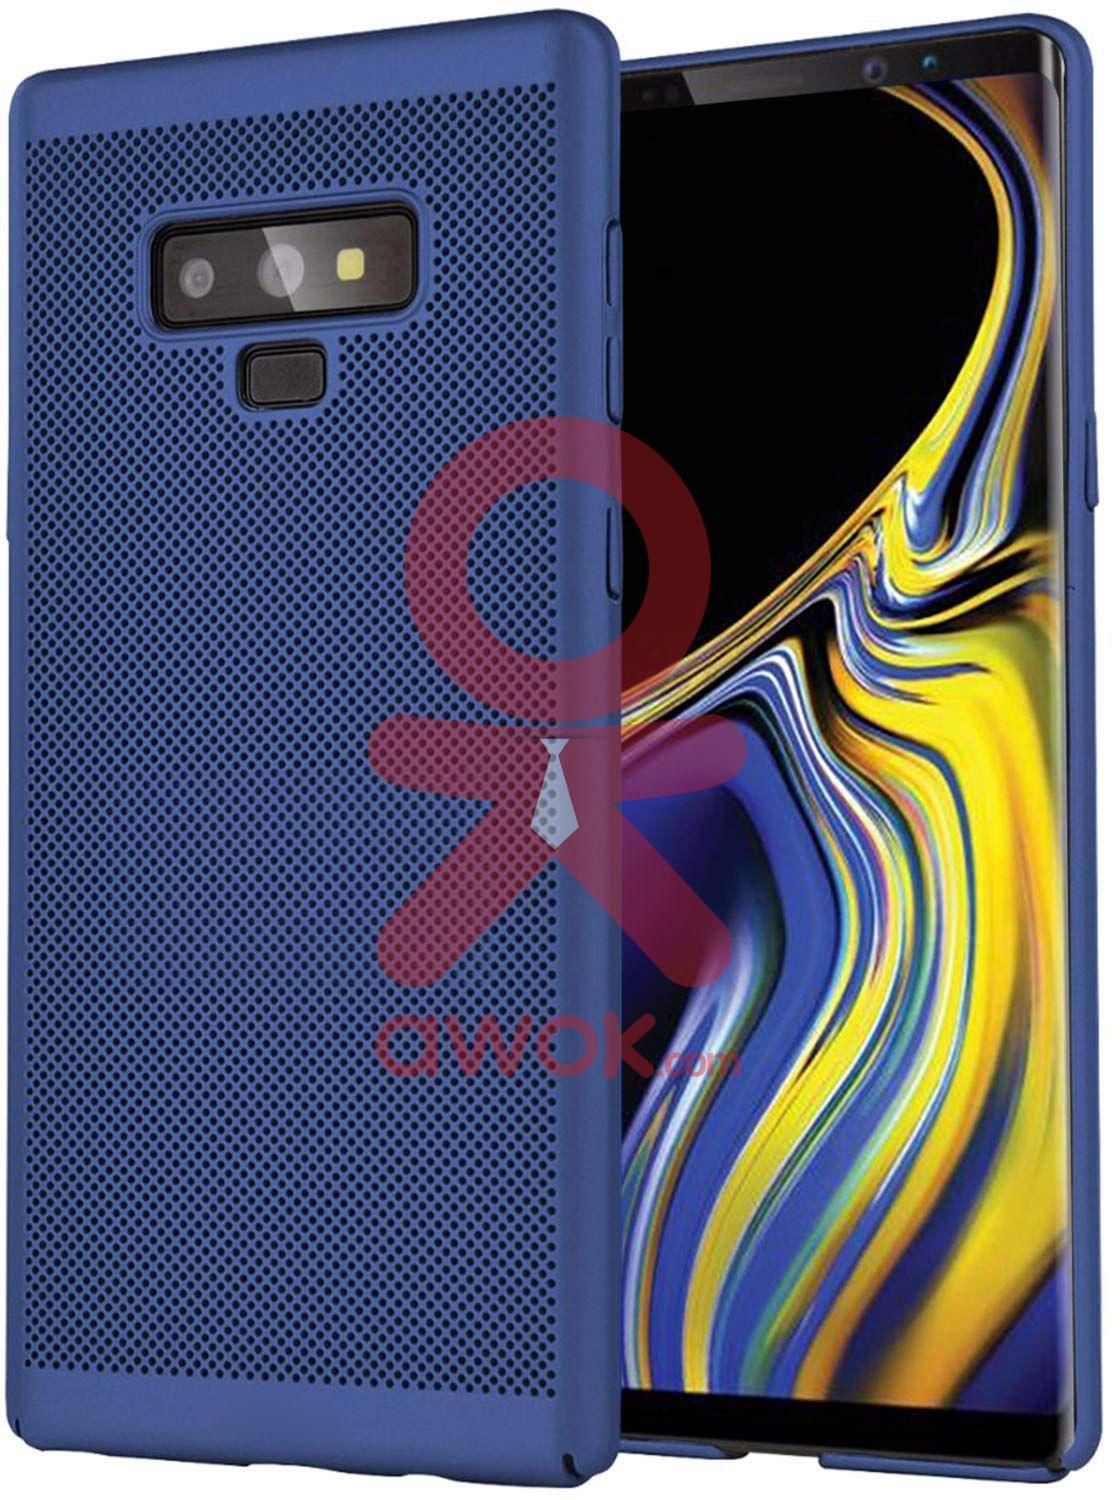 Breathable Heat Dissipating Mesh Cooling Back Cover Case For Samsung Galaxy Note 9, Blue